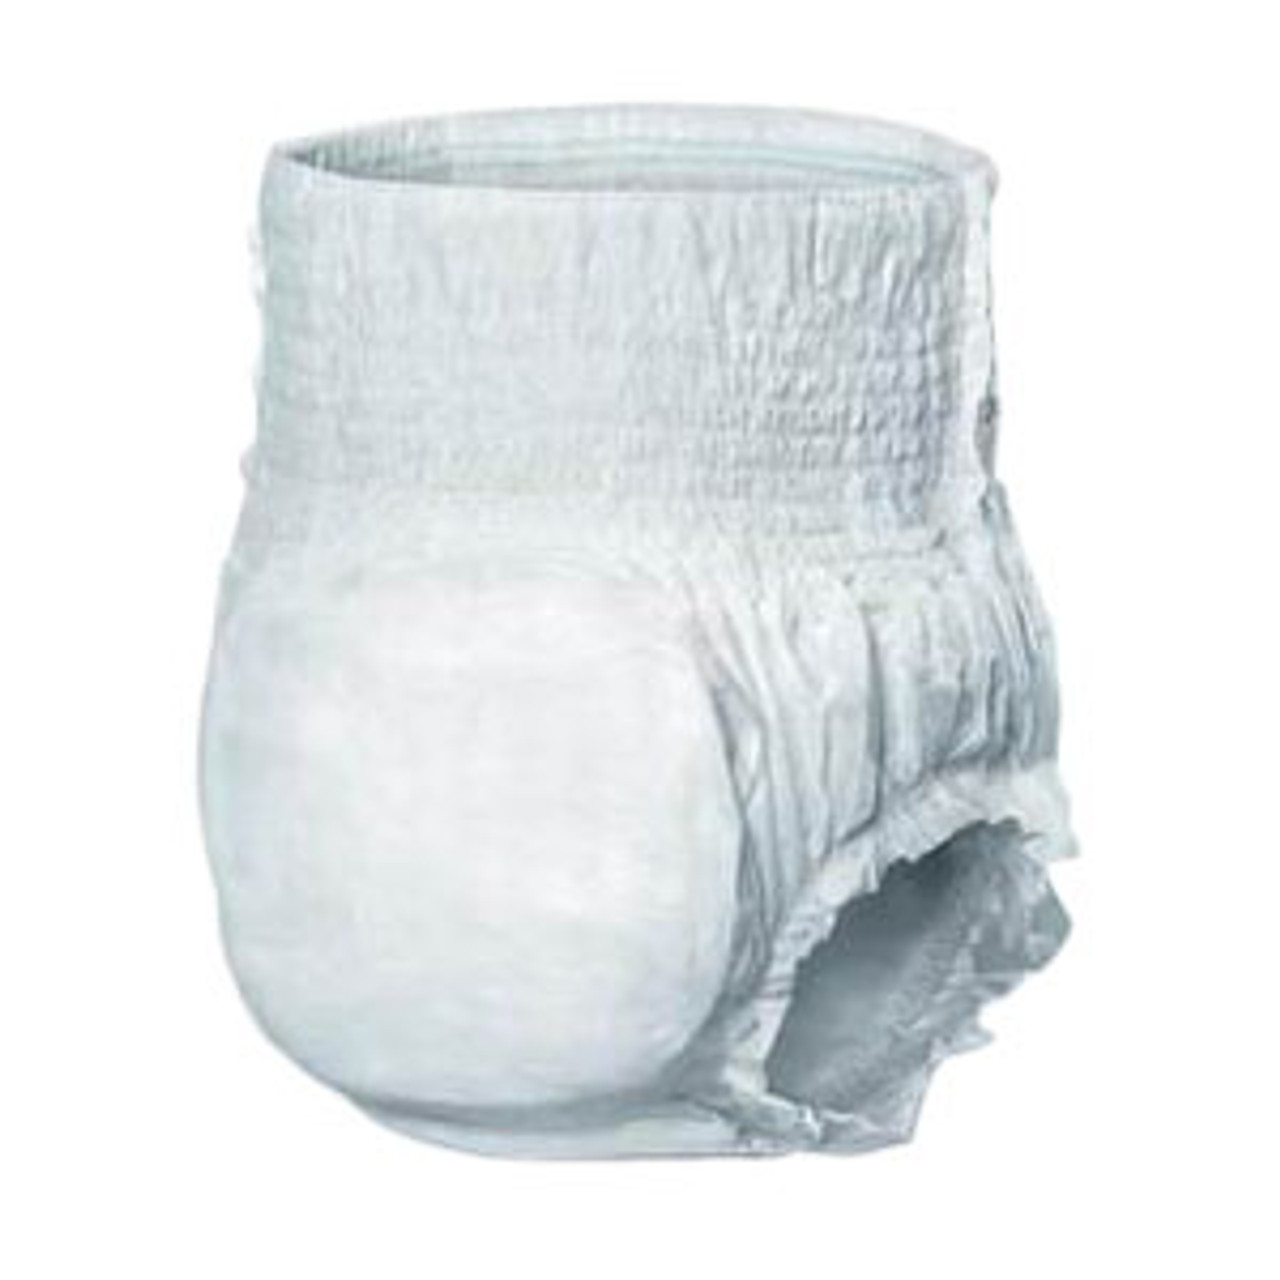 Unisex Adult Absorbent Underwear Sure Care™ Plus Pull On with Tear